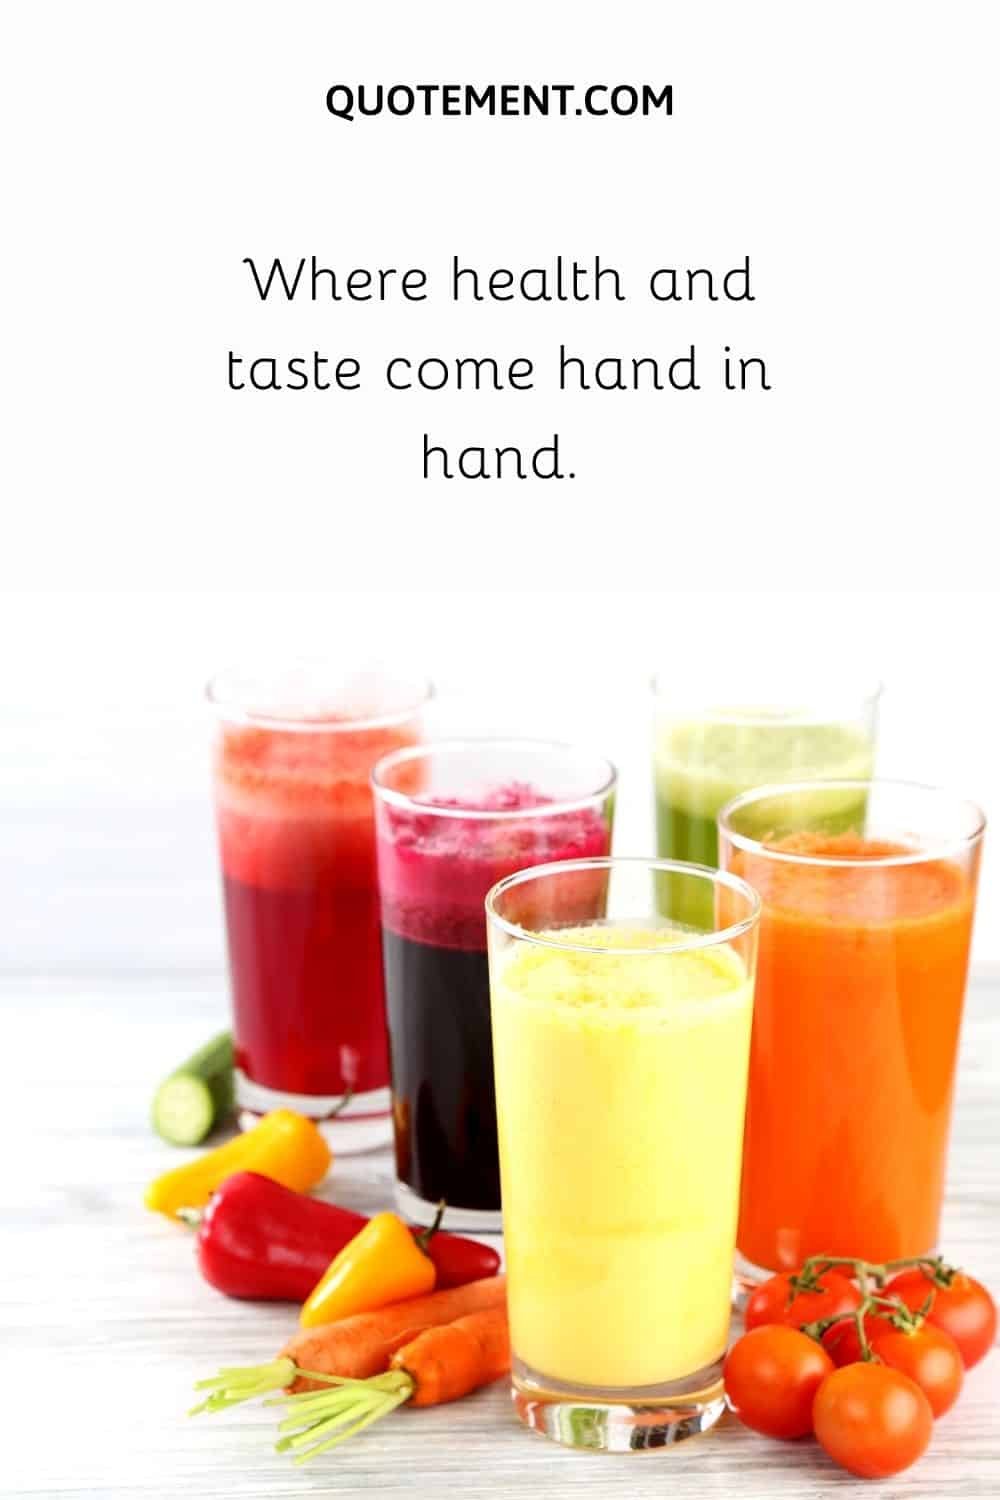 Where health and taste come hand in hand